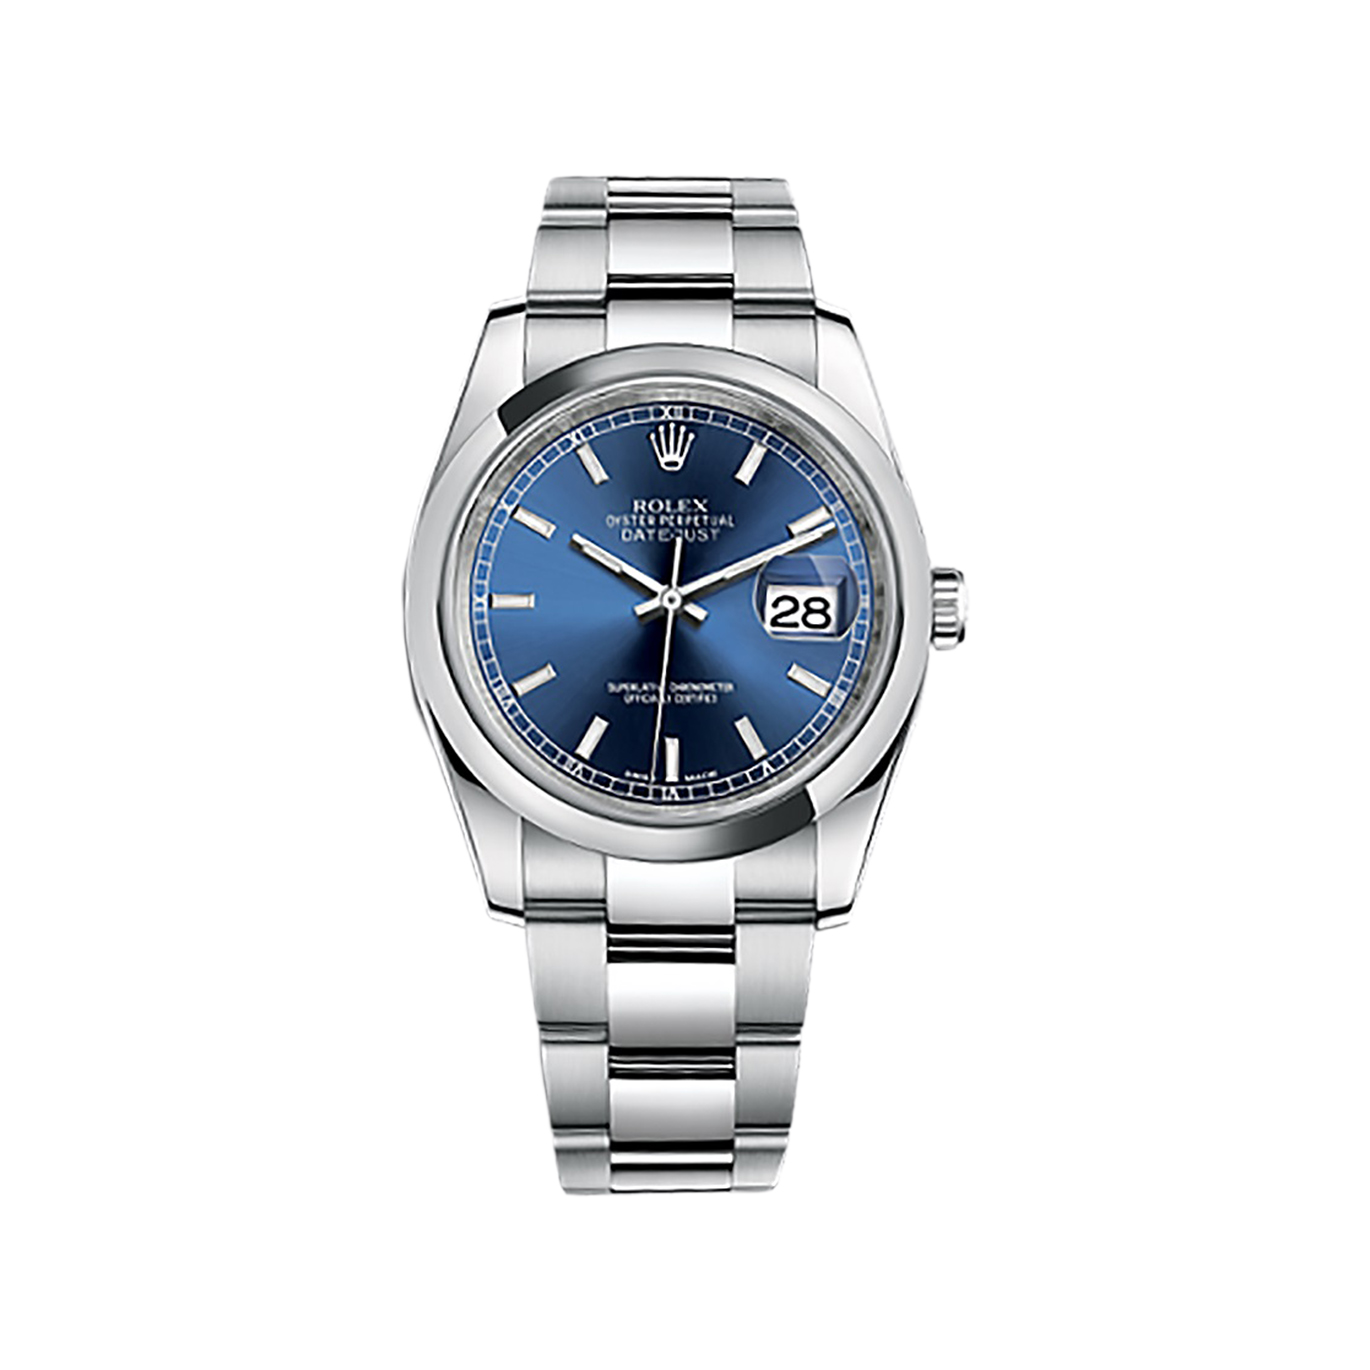 Datejust 36 116200 Stainless Steel Watch (Blue)